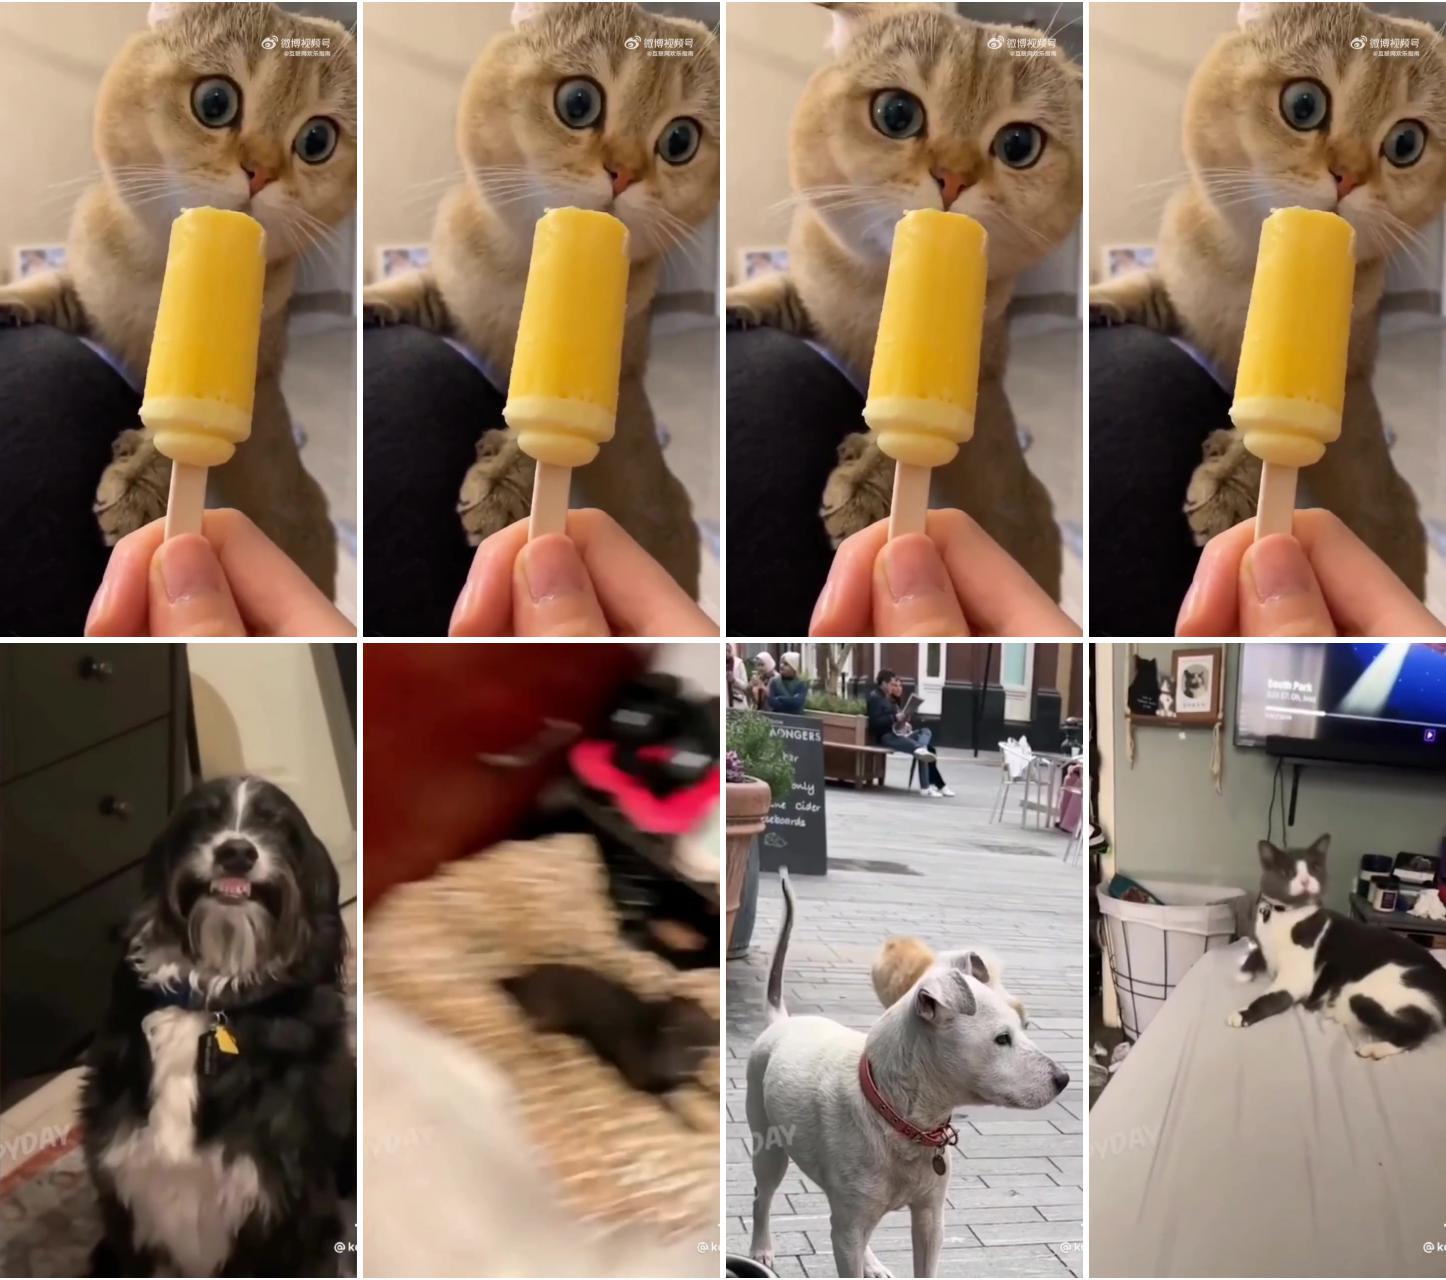 When the cat eats popsicle the first time; fun with animals